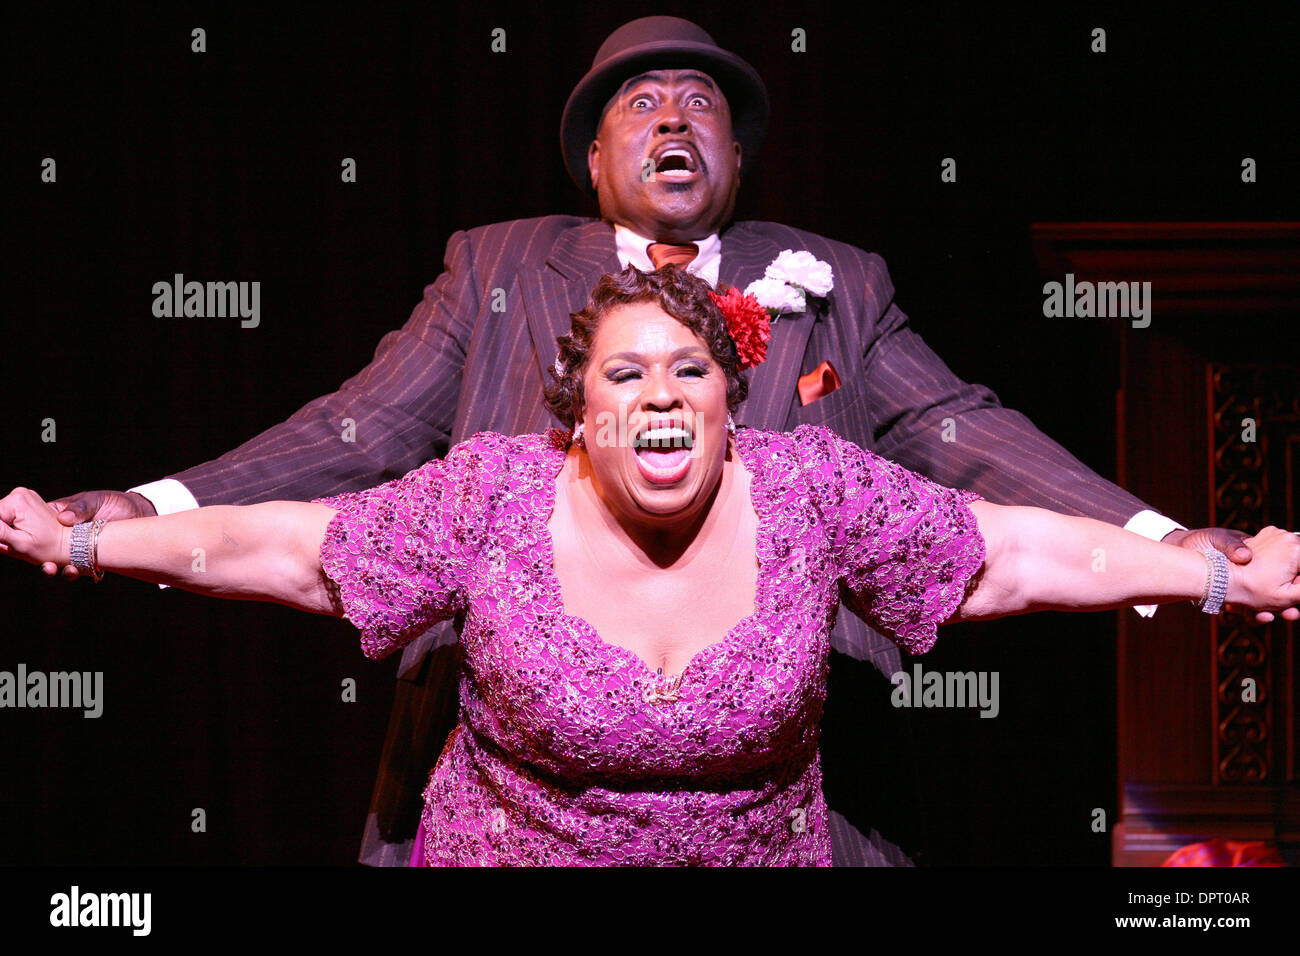 Apr 17, 2009 - Los Angeles, California, United States - Artists DOUG ESKEW (top) and ROZ RYAN perform on stage during a dress rehearsal for the musical show 'Ain't Misbeavin' at the Ahmanson Theatre. (Credit Image: © Ringo Chiu/ZUMA Press) Stock Photo